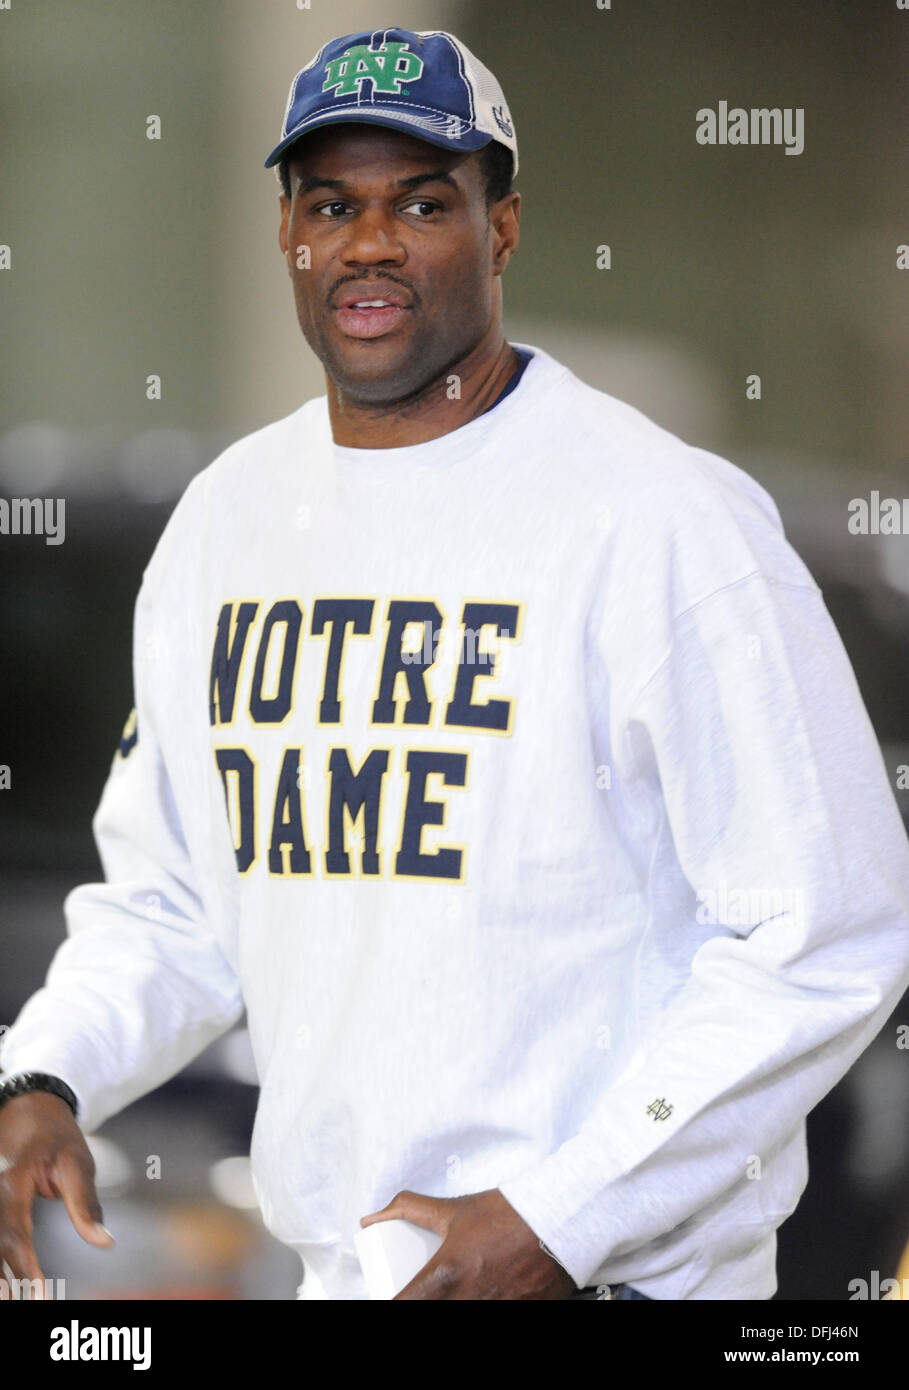 October 05, 2013: San Antonio Spurs Hall of Famer David Robinson and Notre Dame Alumni attends the an NCAA Football game between the Arizona State University Sun Devils and the Notre Dame Fighting Irish at AT&T Stadium in Arlington, TX Stock Photo